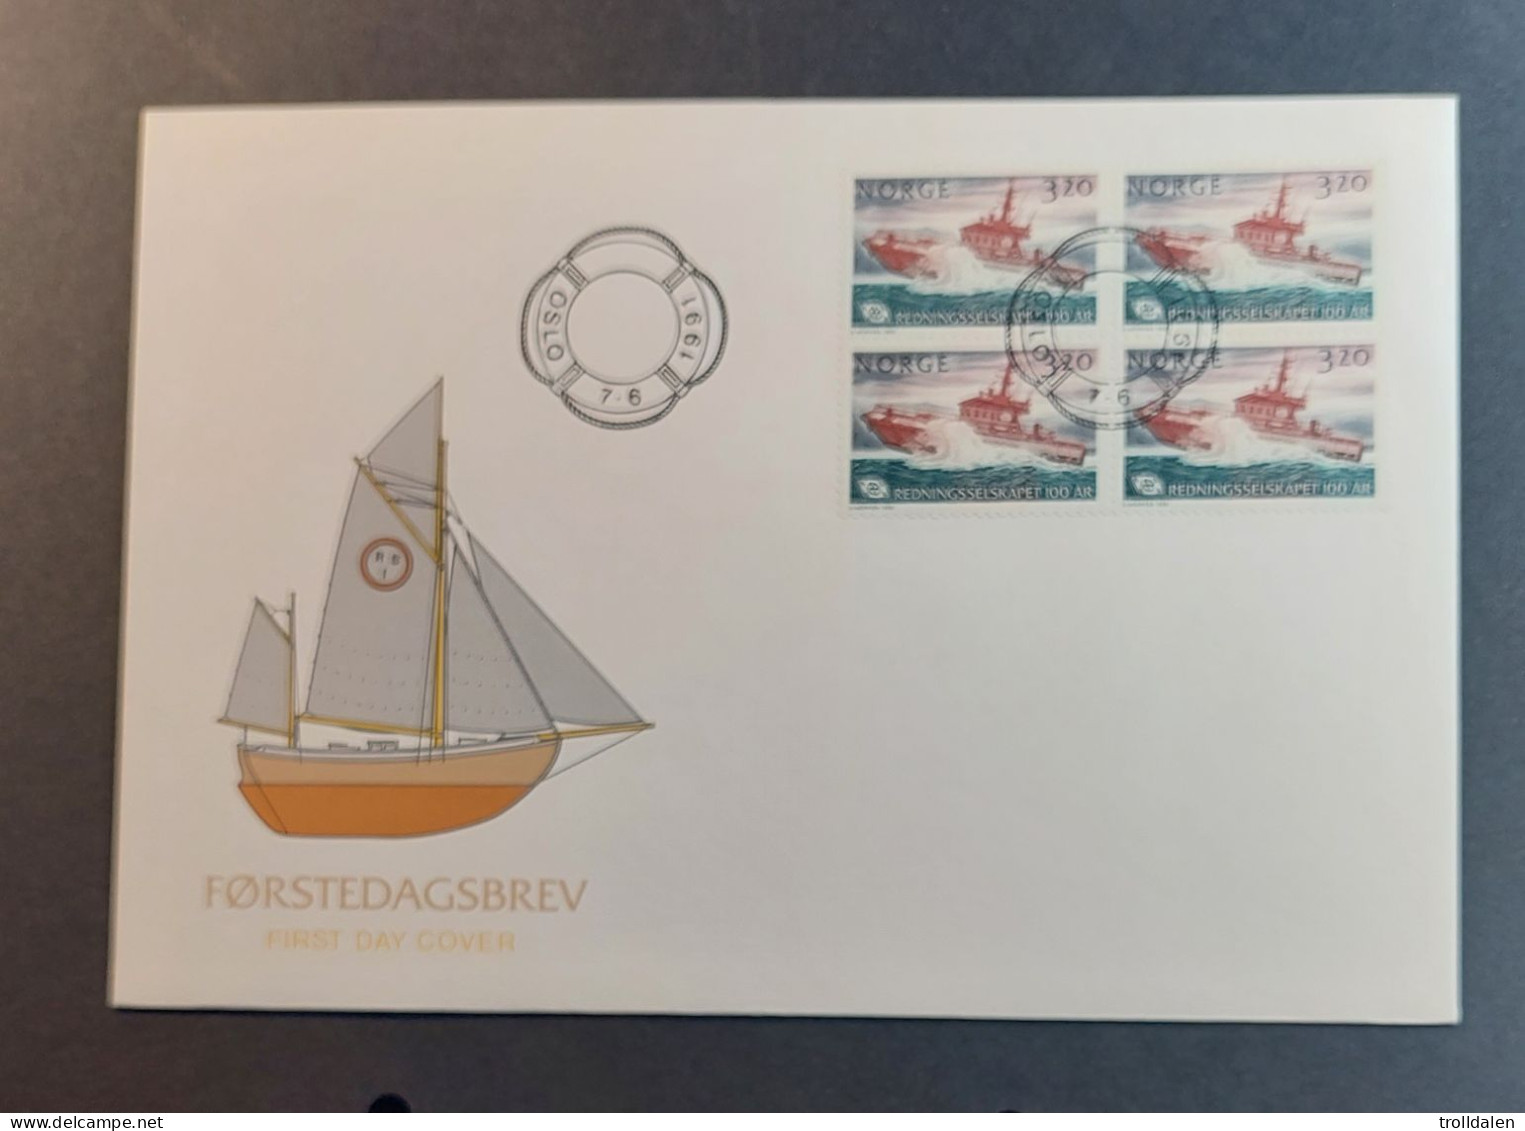 Norway FDC 1991 - FDC